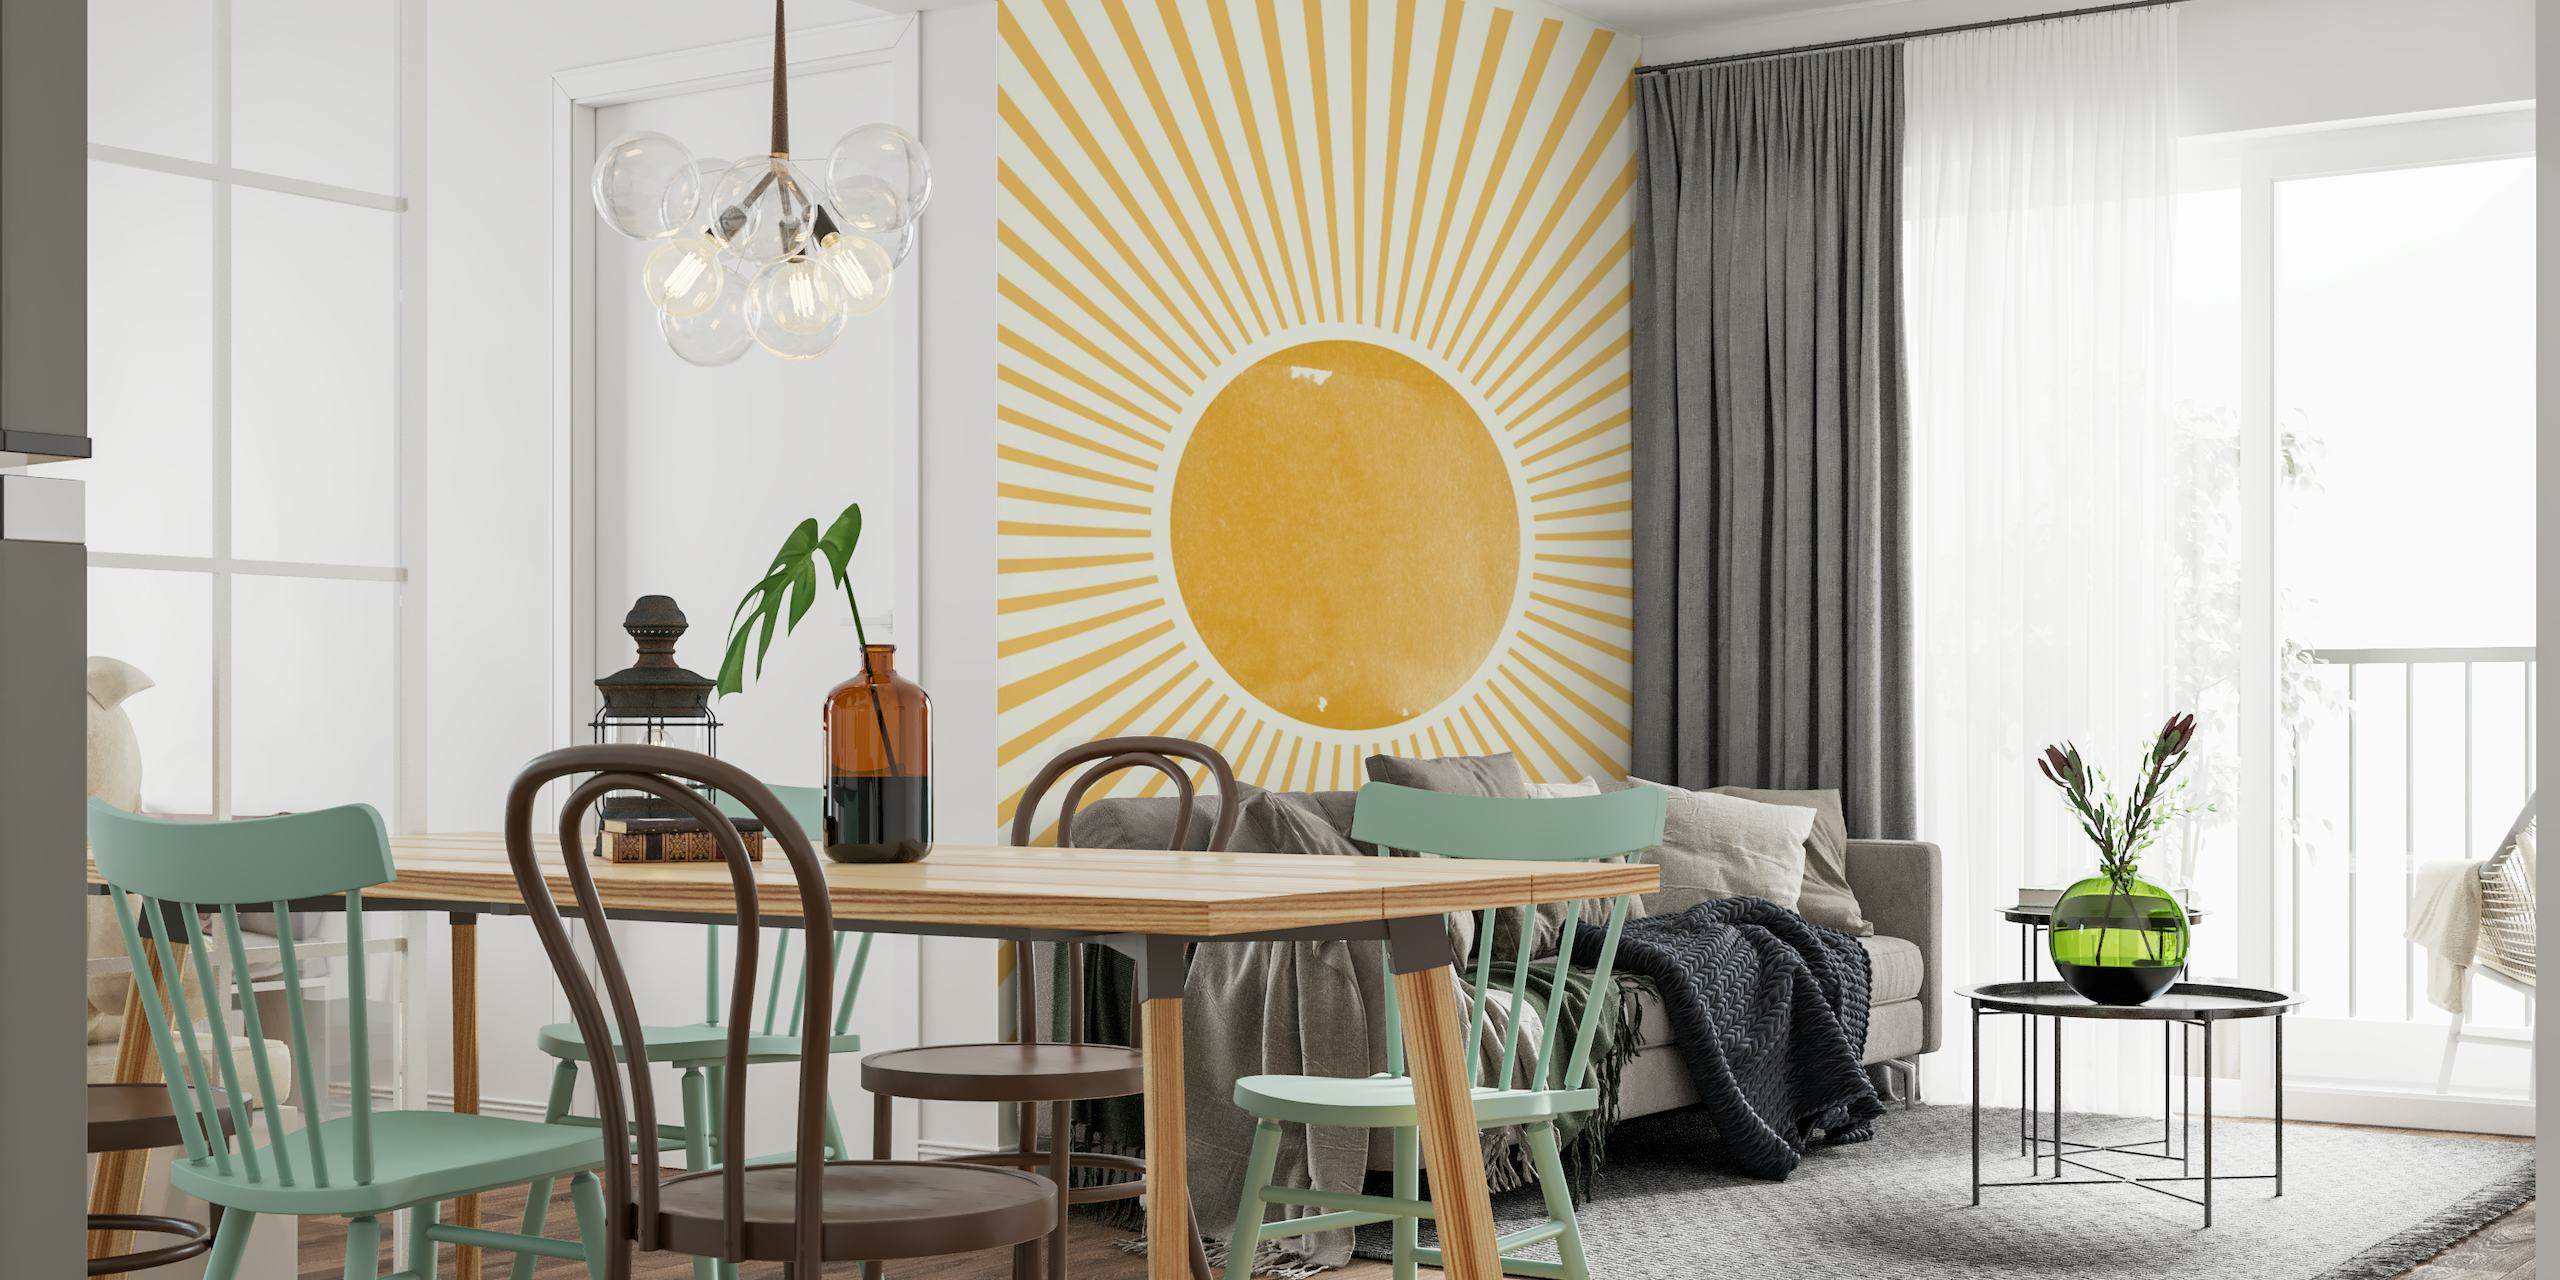 Vintage sun wall mural in golden hues with a retro 70s vibe